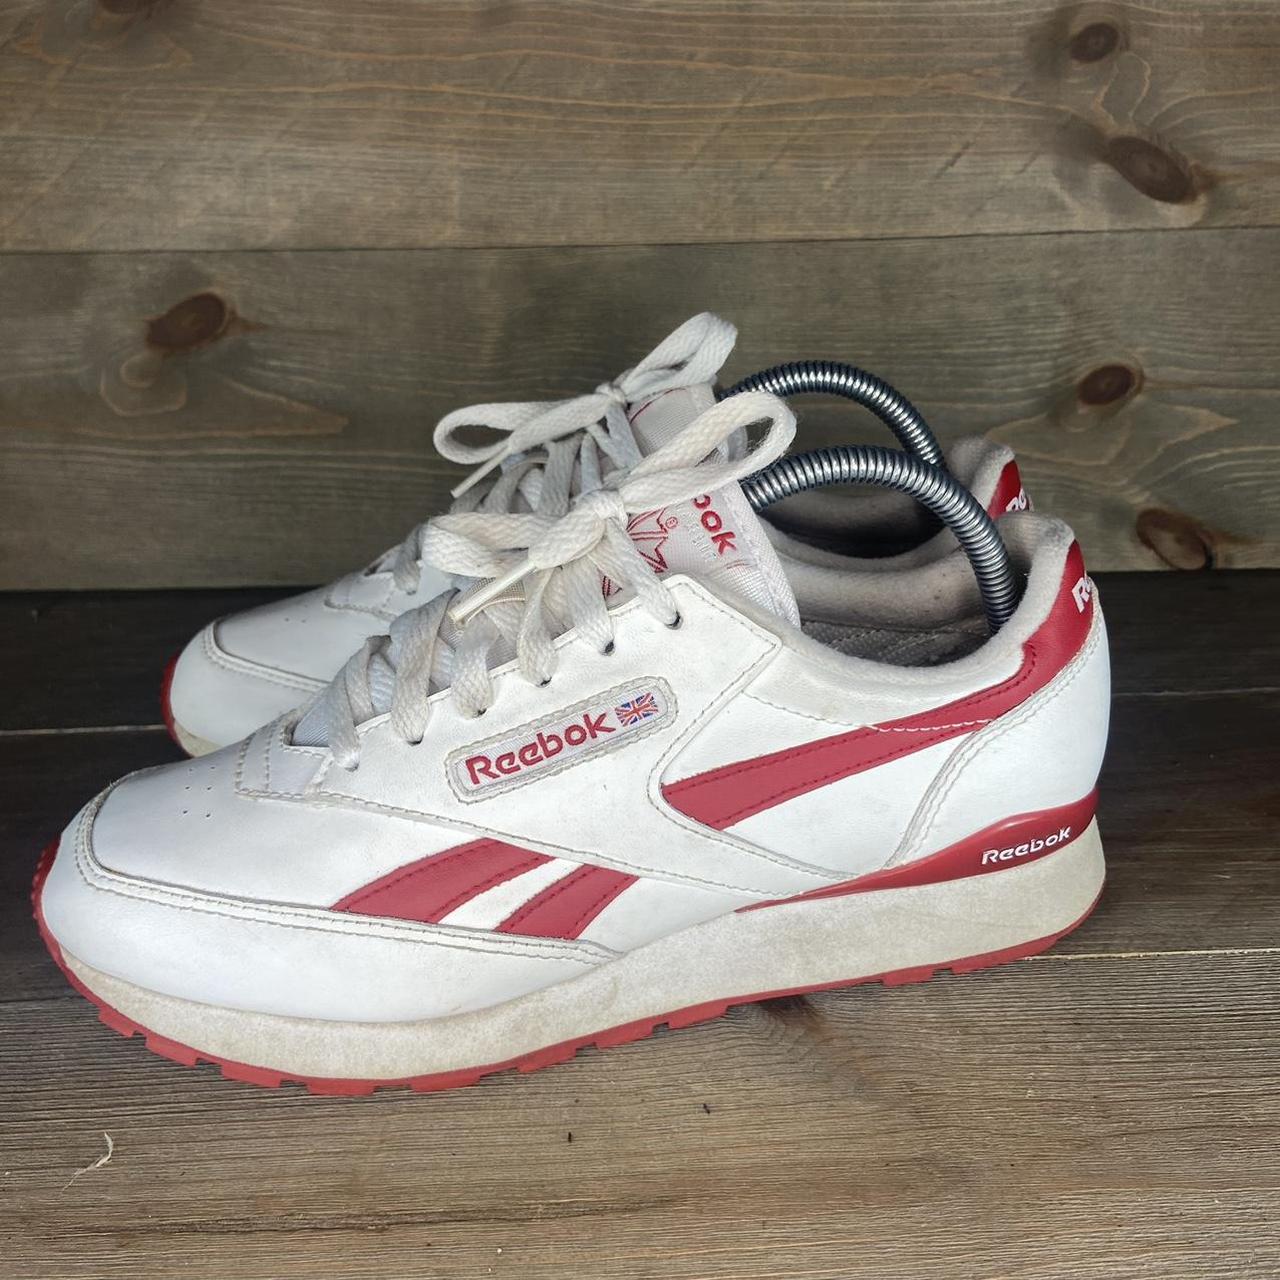 Overgivelse har taget fejl Do Reebok classic Womens size 8 shoes red white leather... - Depop